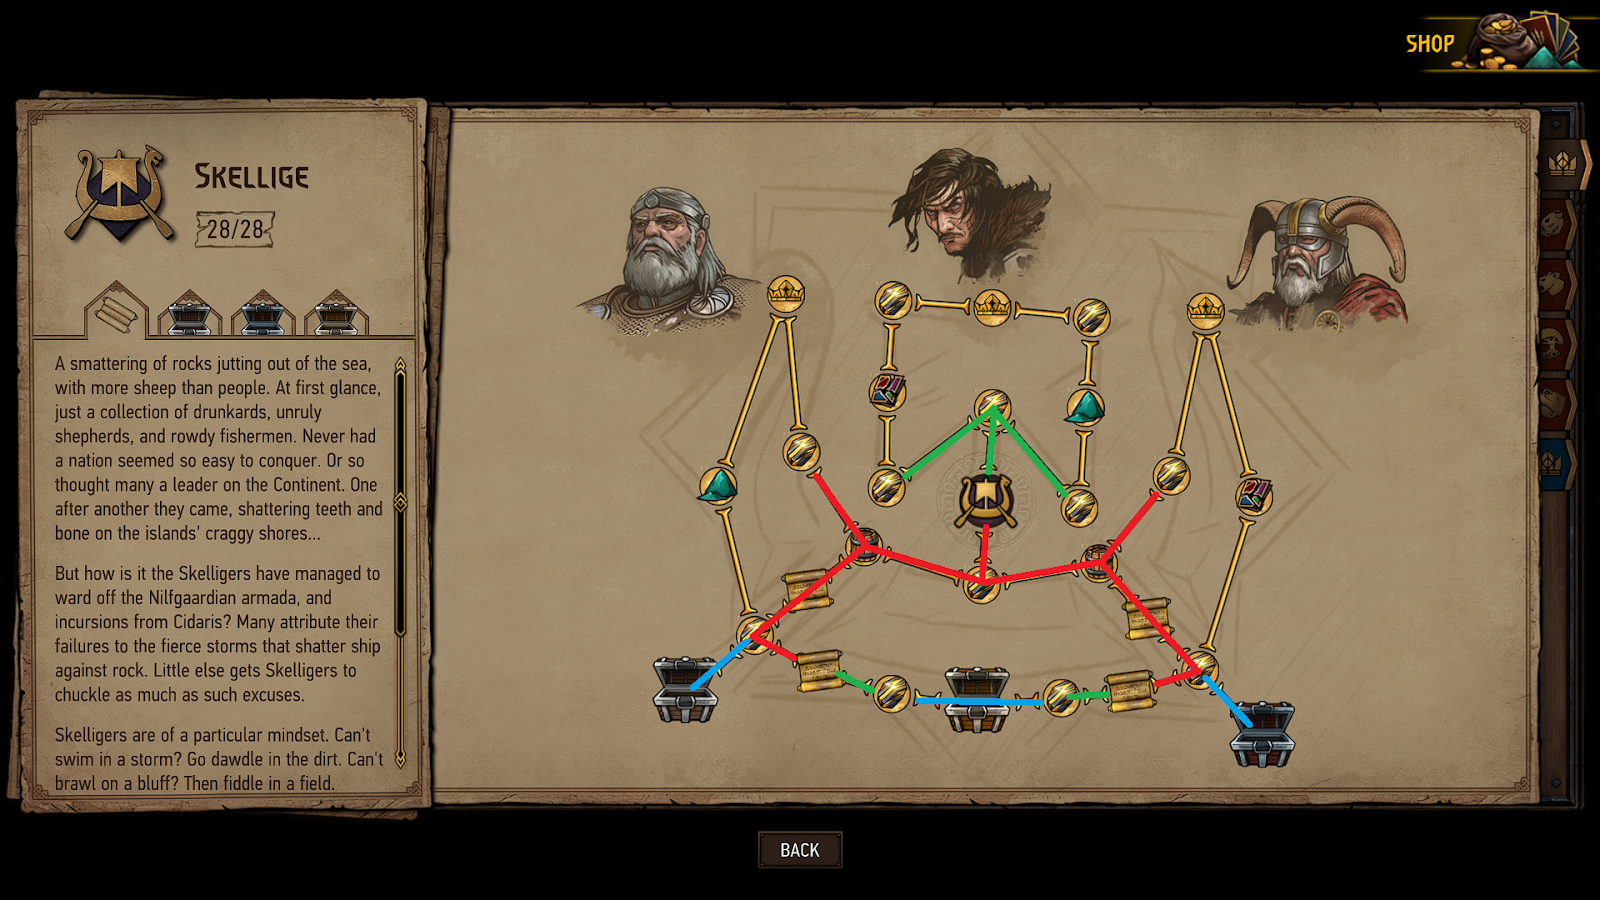 The different routes are shown in red, blue and green on the reward tree for Skellige